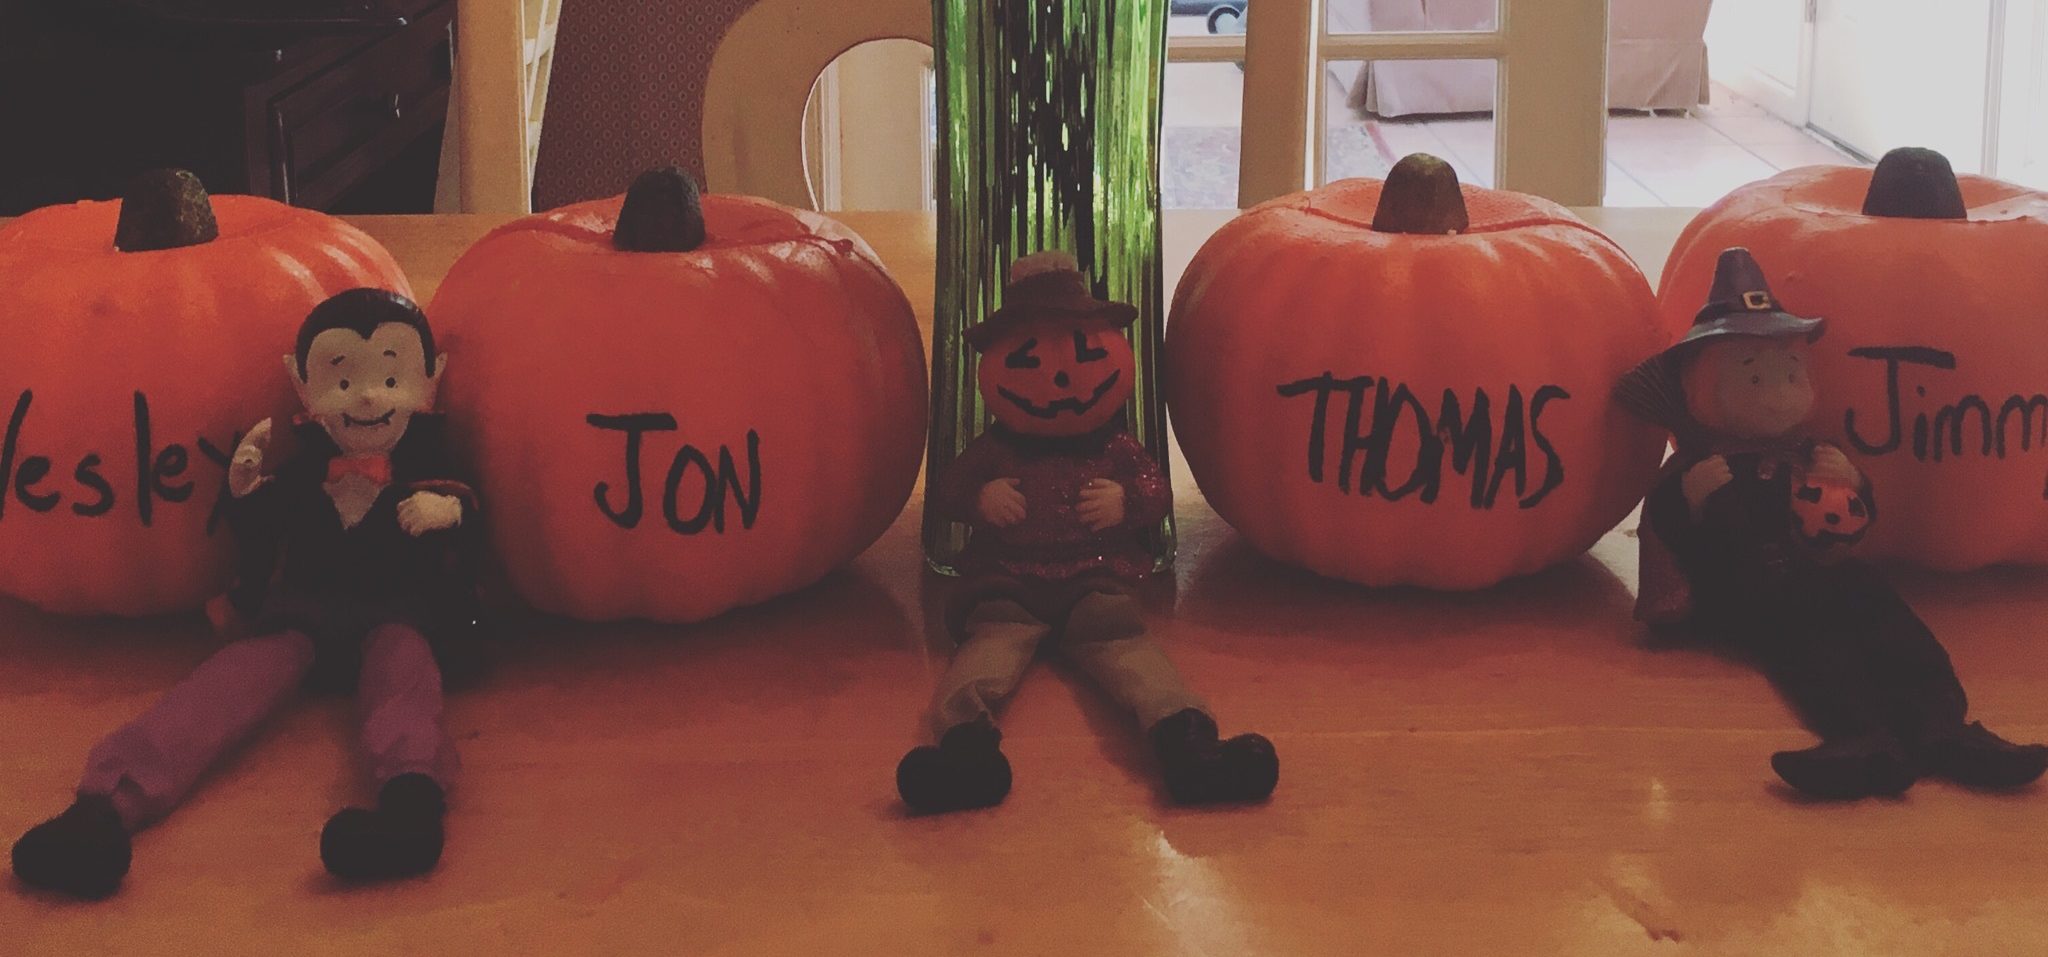 Four pumpkins, each with a person's name written on it, on a counter in a home.